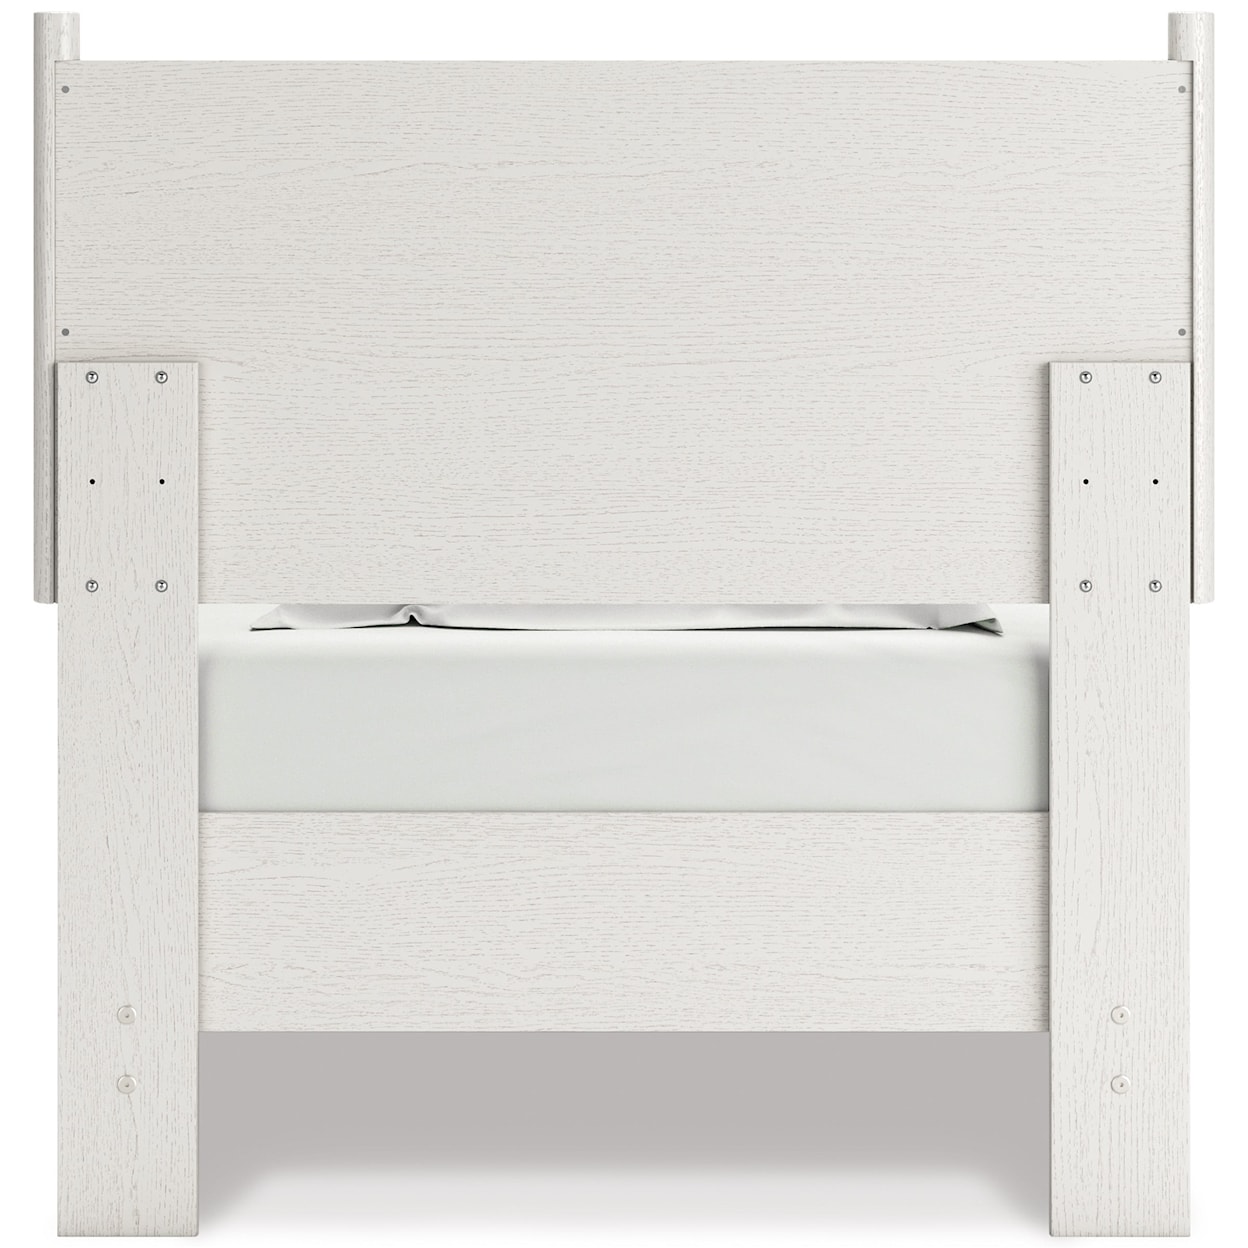 Signature Design by Ashley Aprilyn Twin Panel Bed